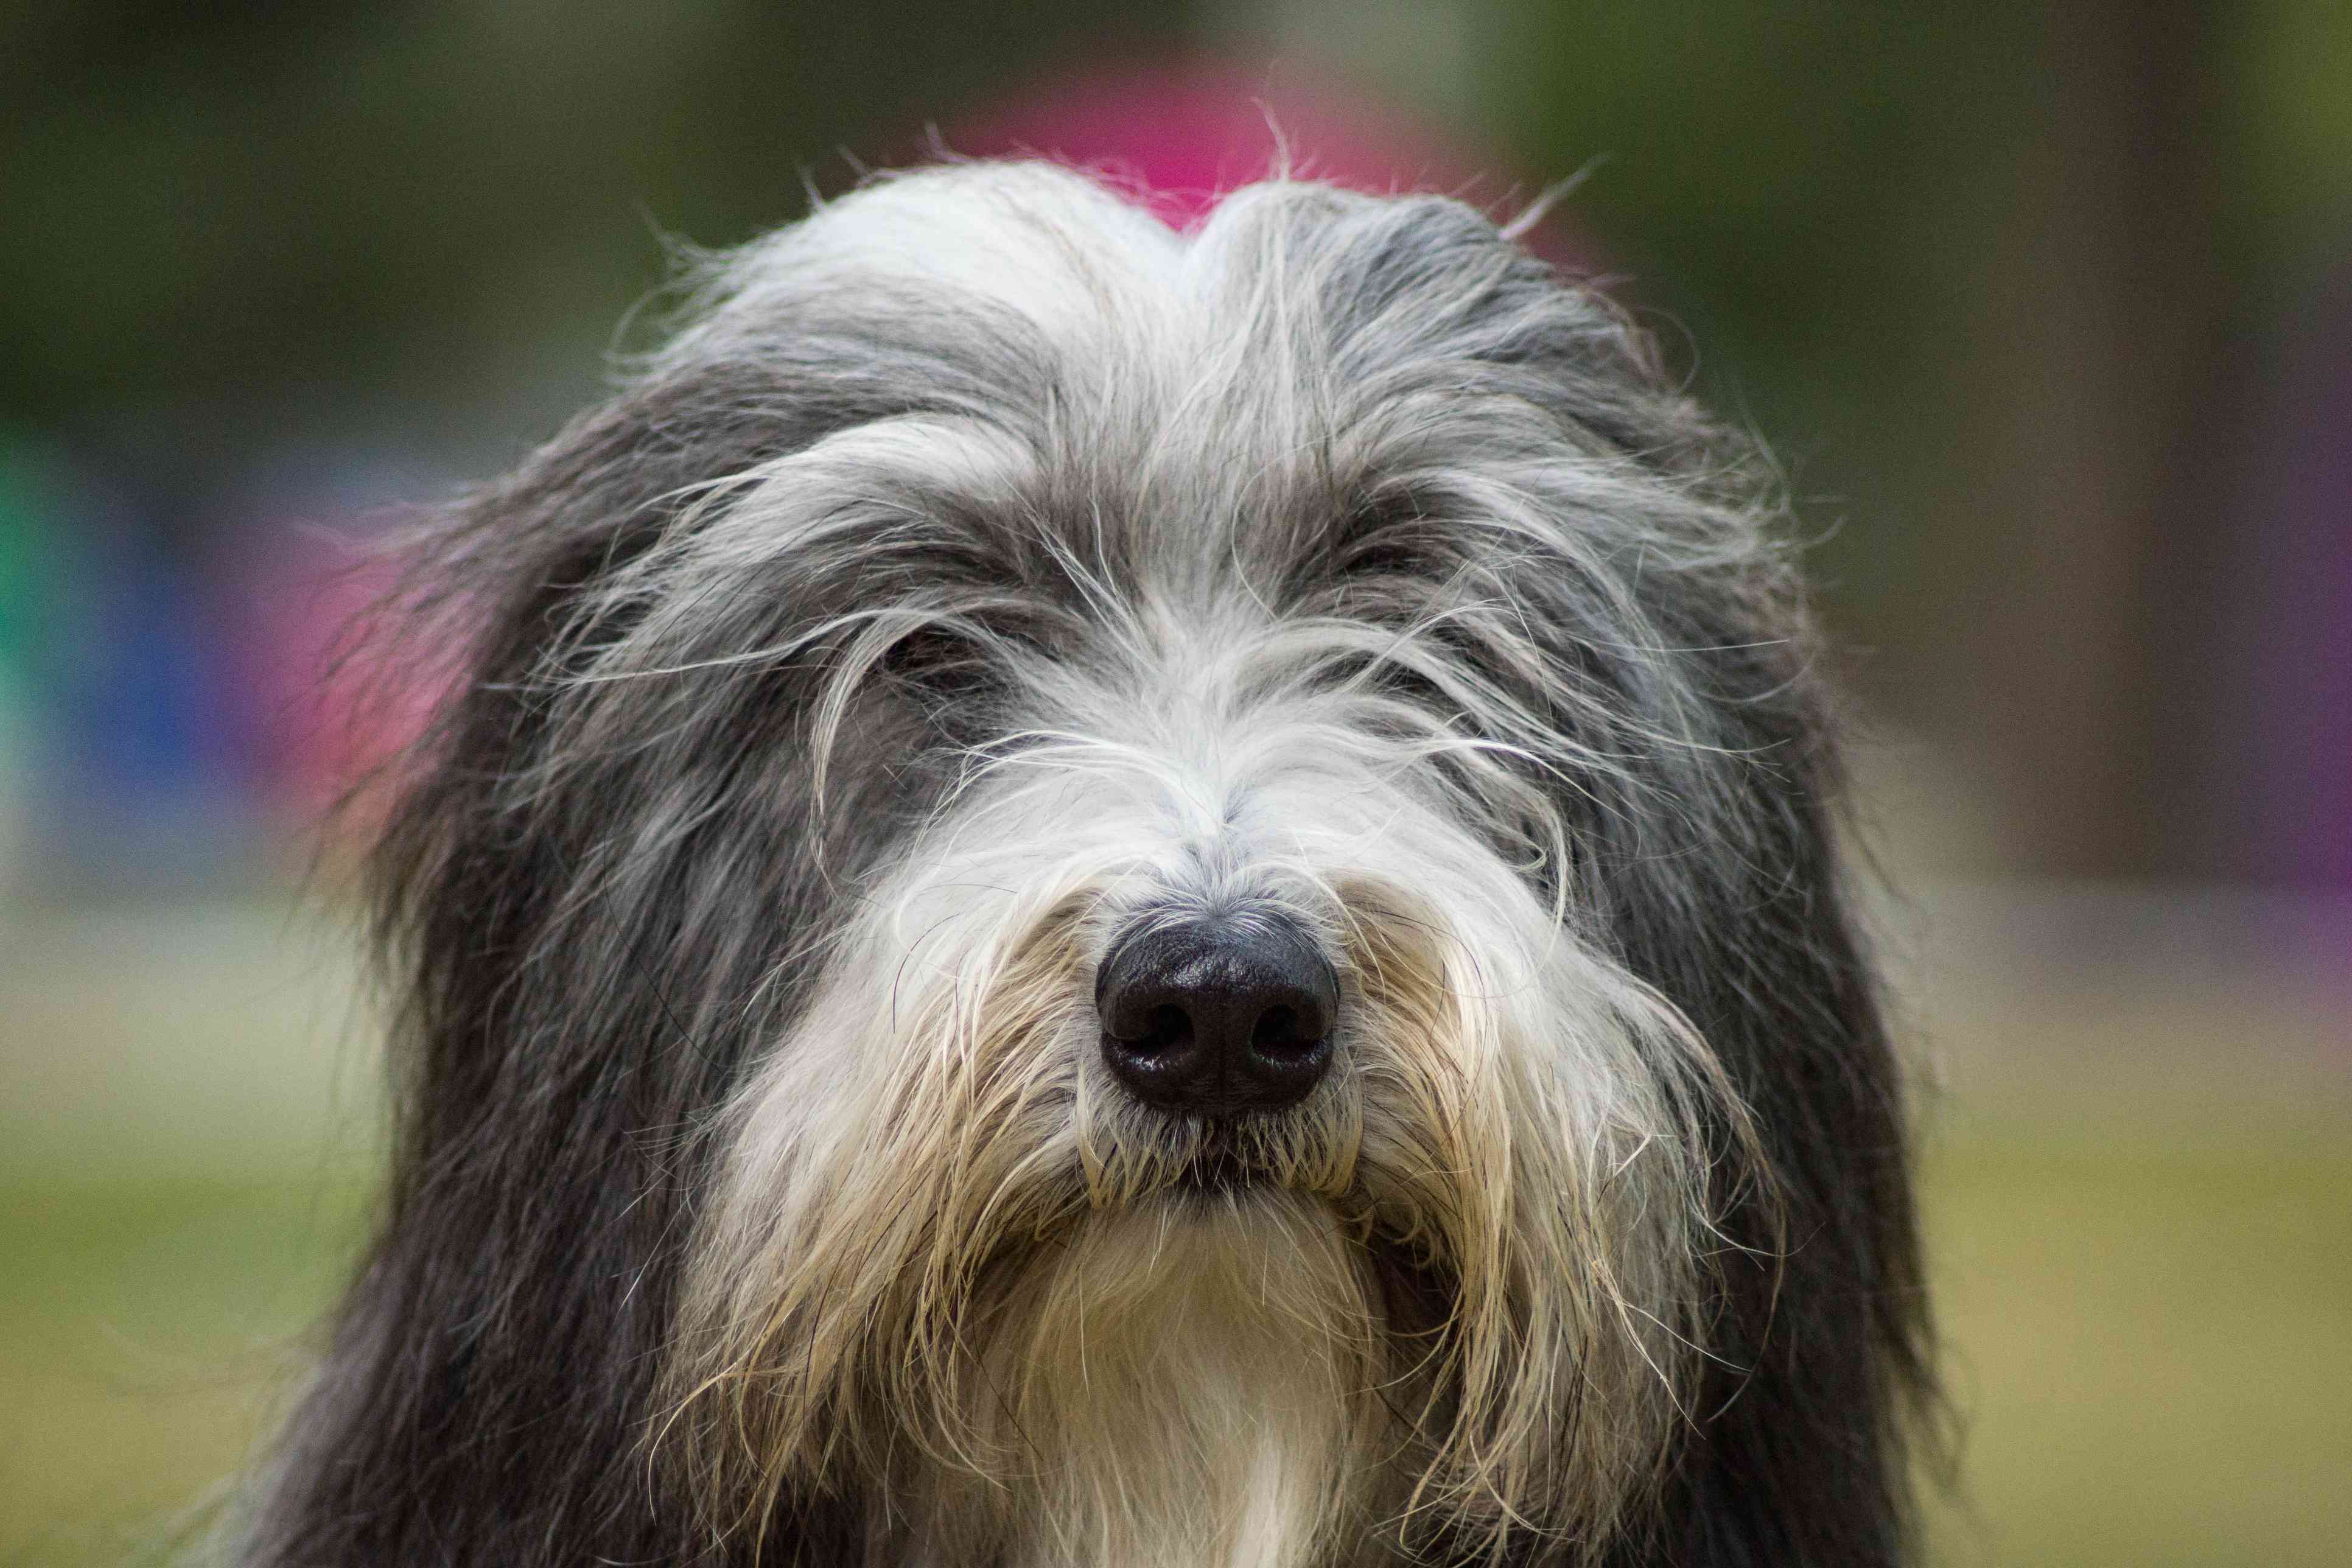 A close-up of a Bearded Collie.